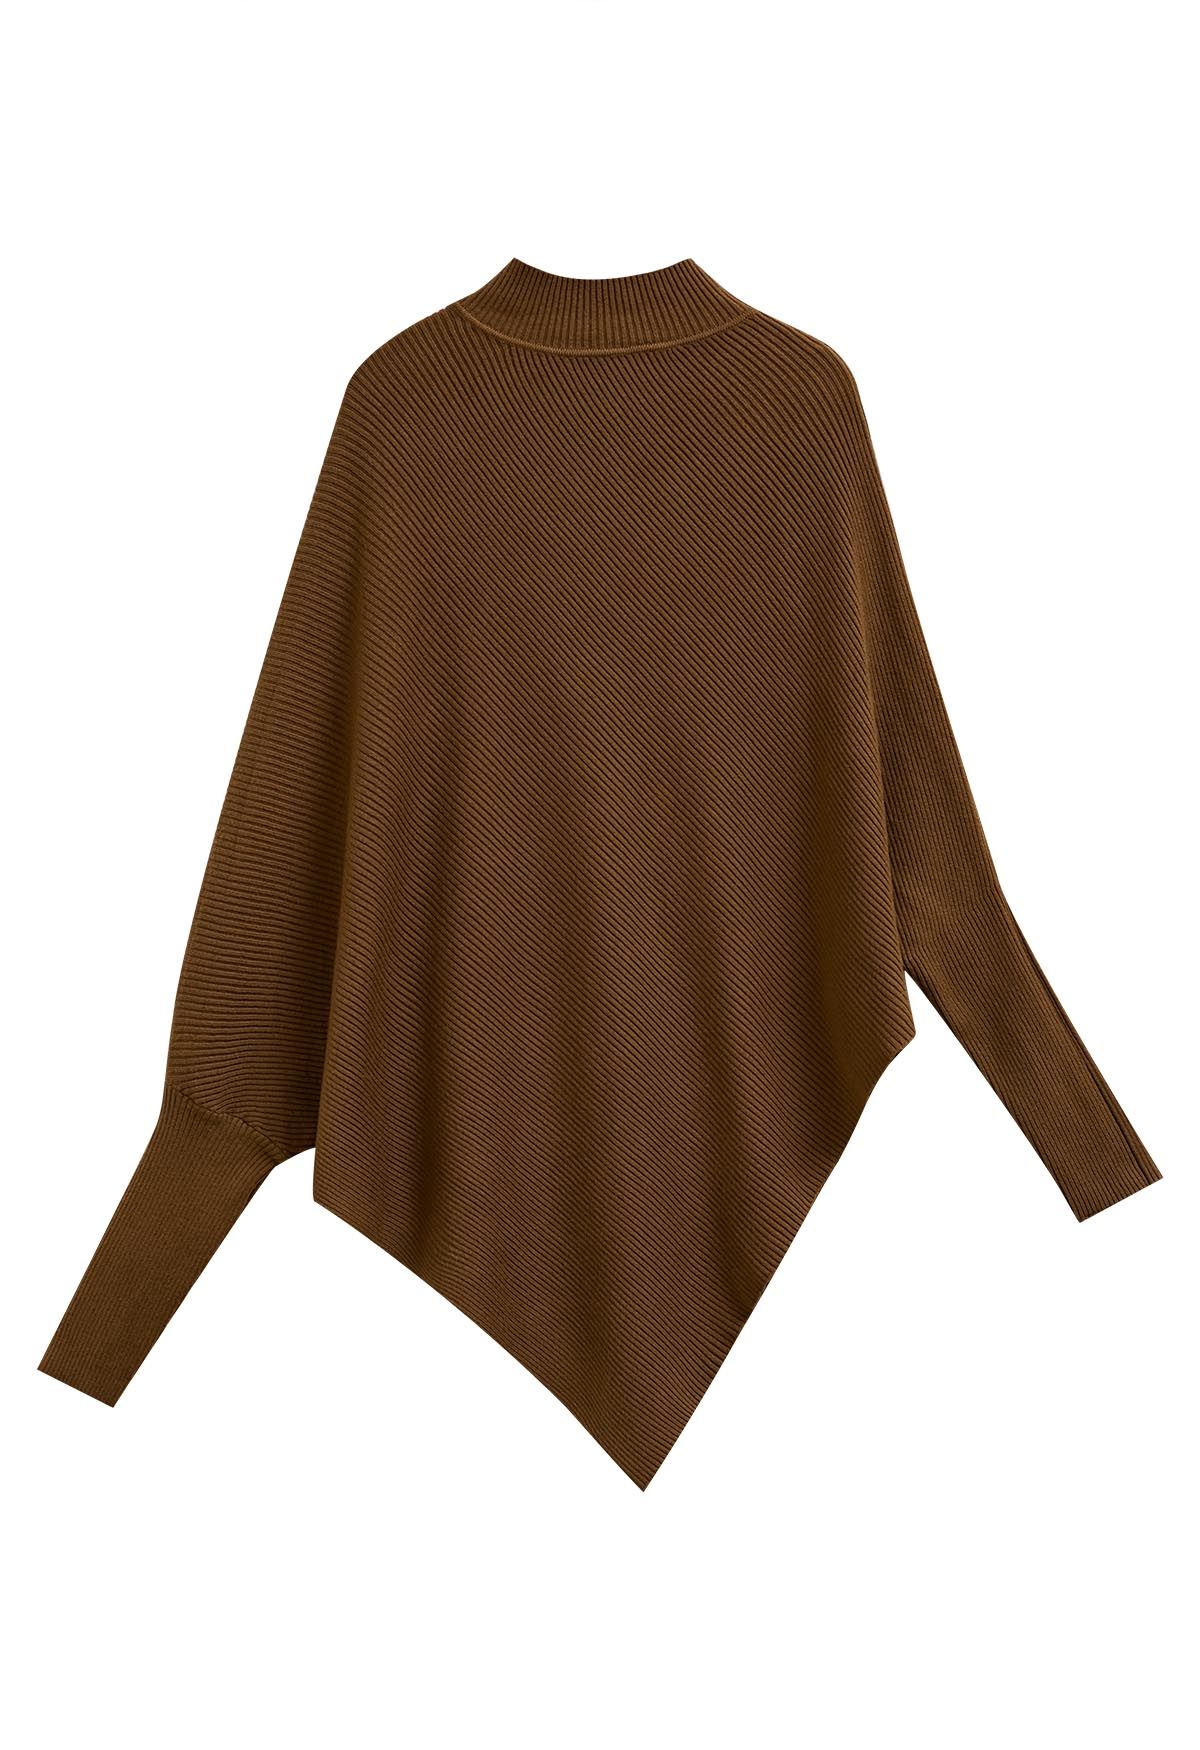 Asymmetric Batwing Sleeve Ribbed Knit Poncho in Caramel